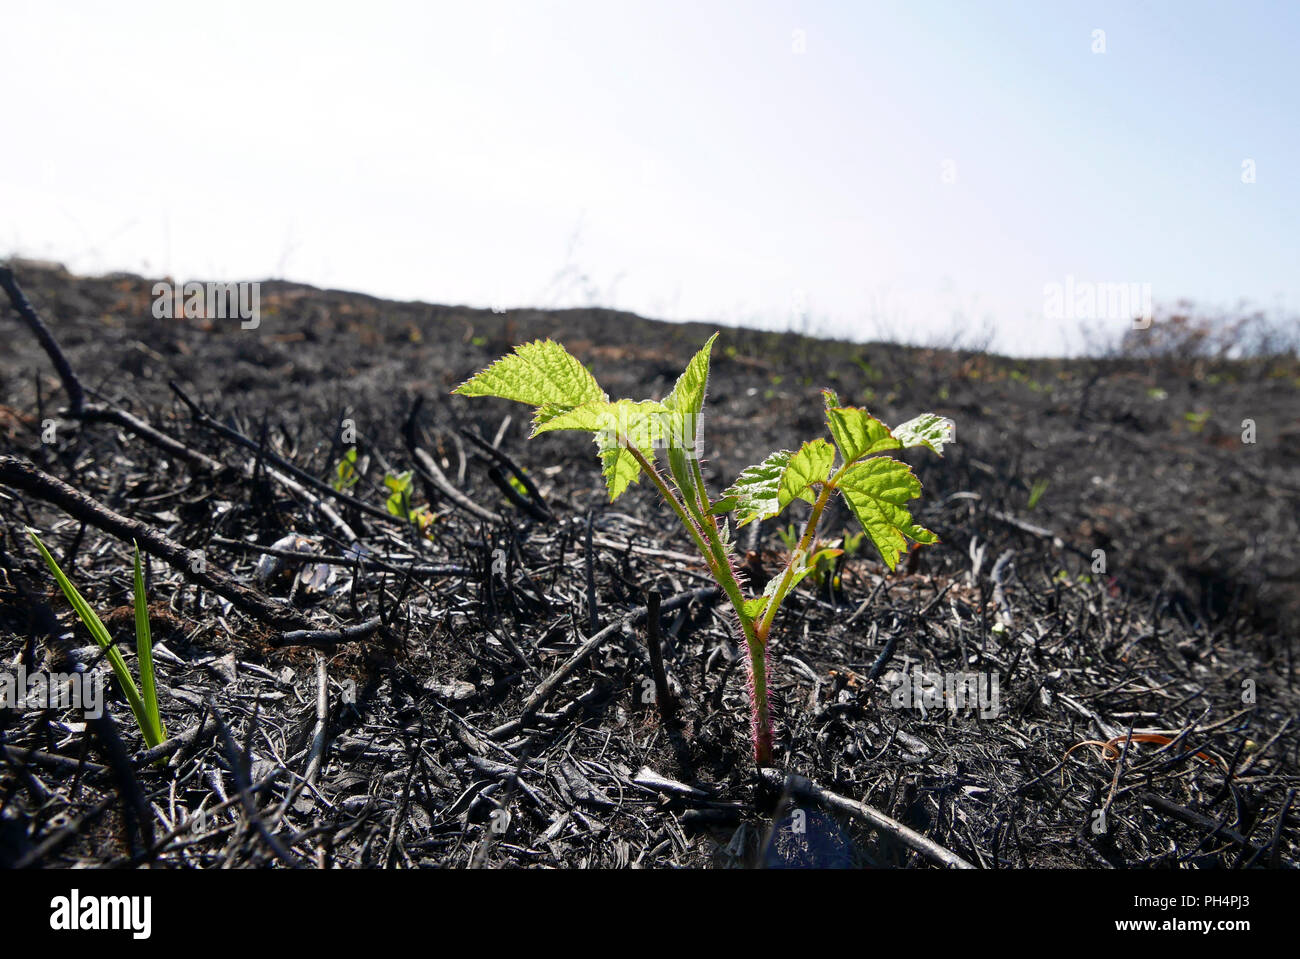 New shoots appear from the burnt earth within weeks of a destructive wild fire on St Annes nature reserve, lancashire,UK Stock Photo